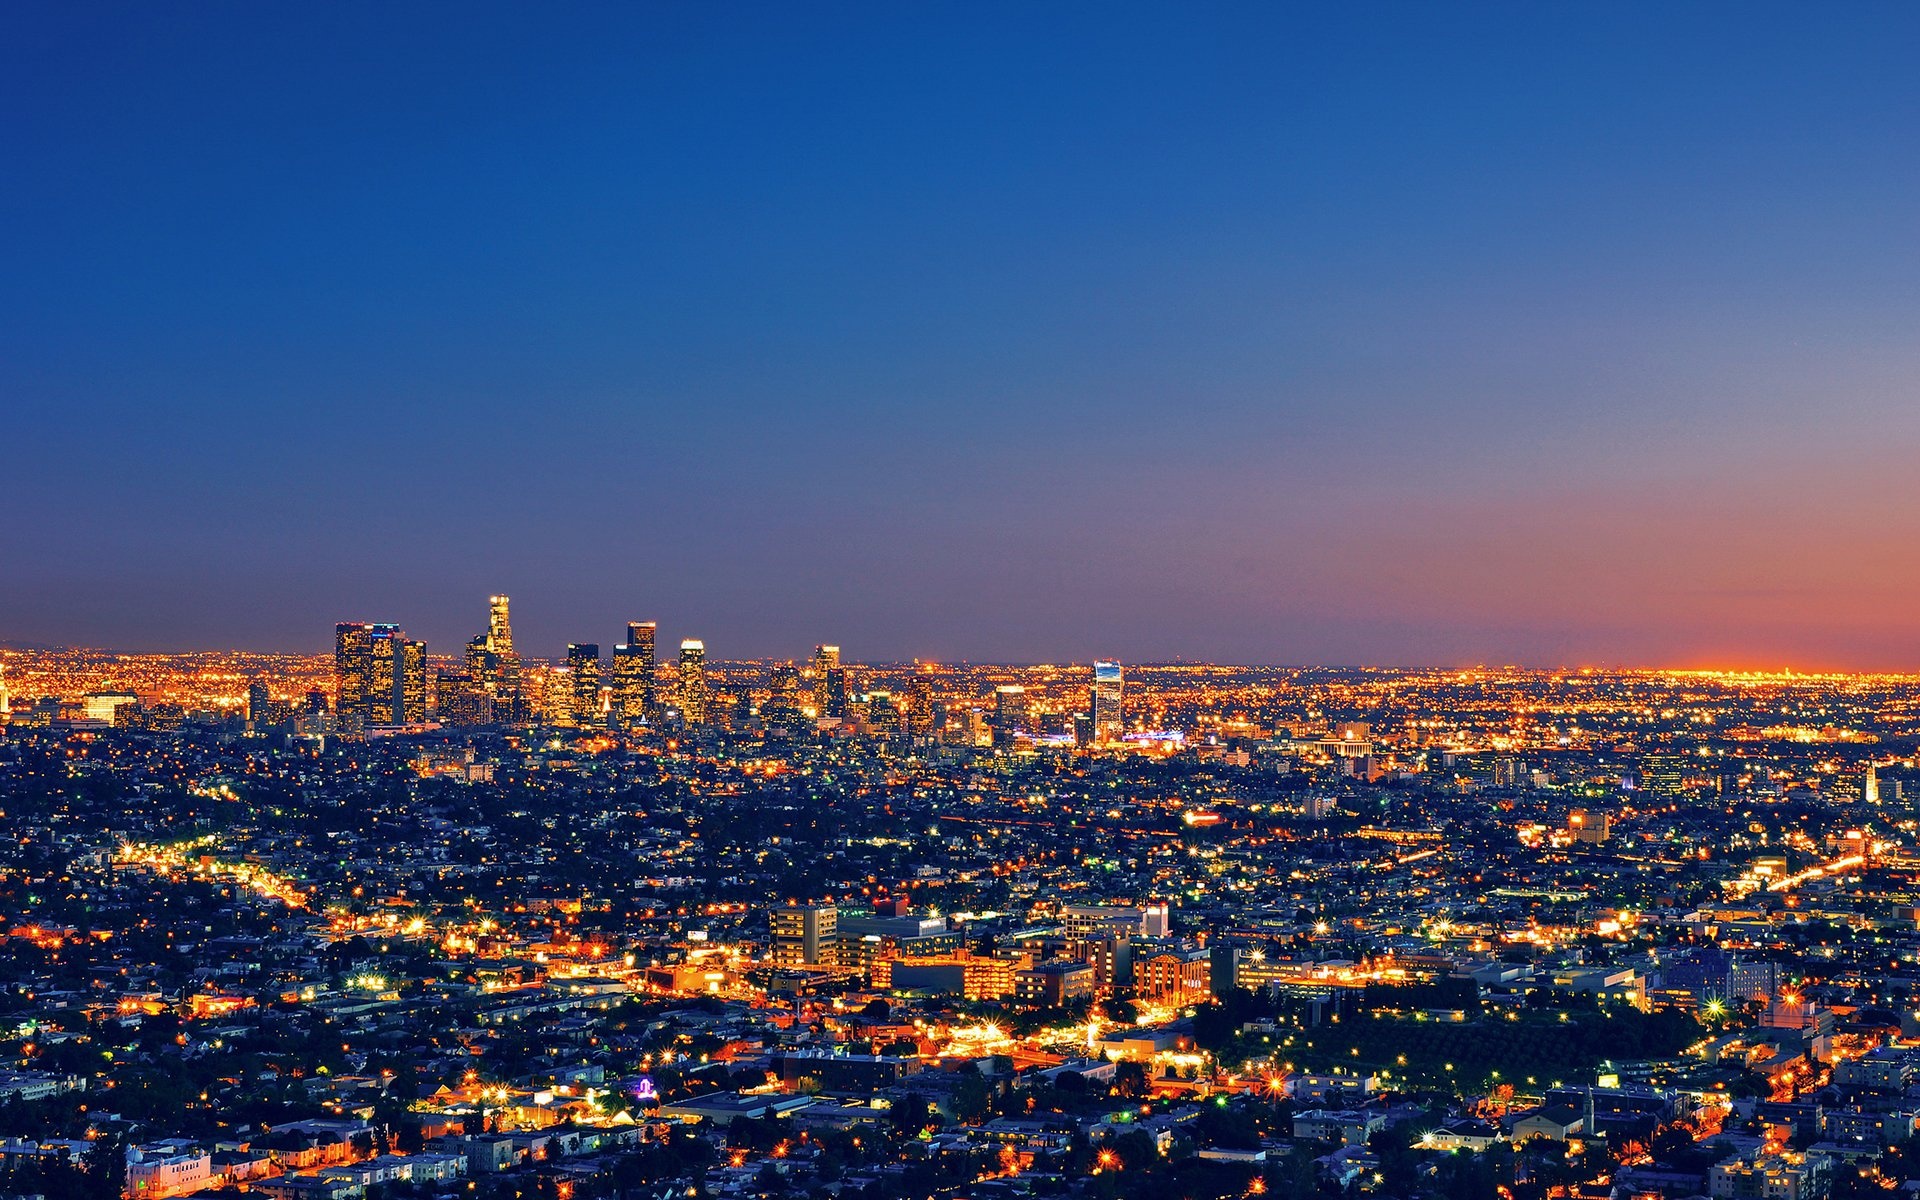 Los Angeles: One of the most must-see cities in the world, LA, California. 1920x1200 HD Wallpaper.